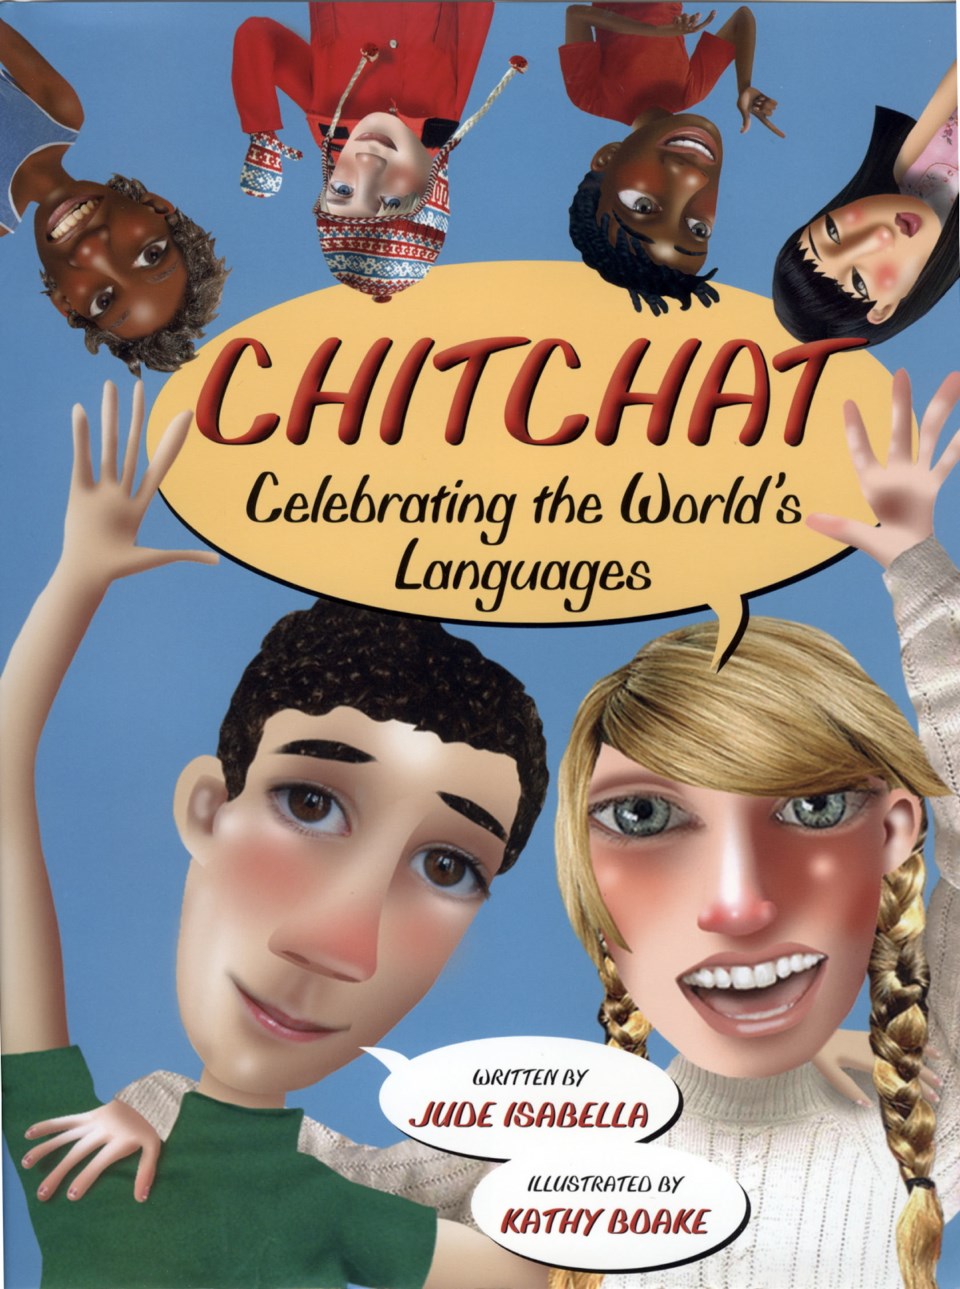 Chitchat_book cover.jpg